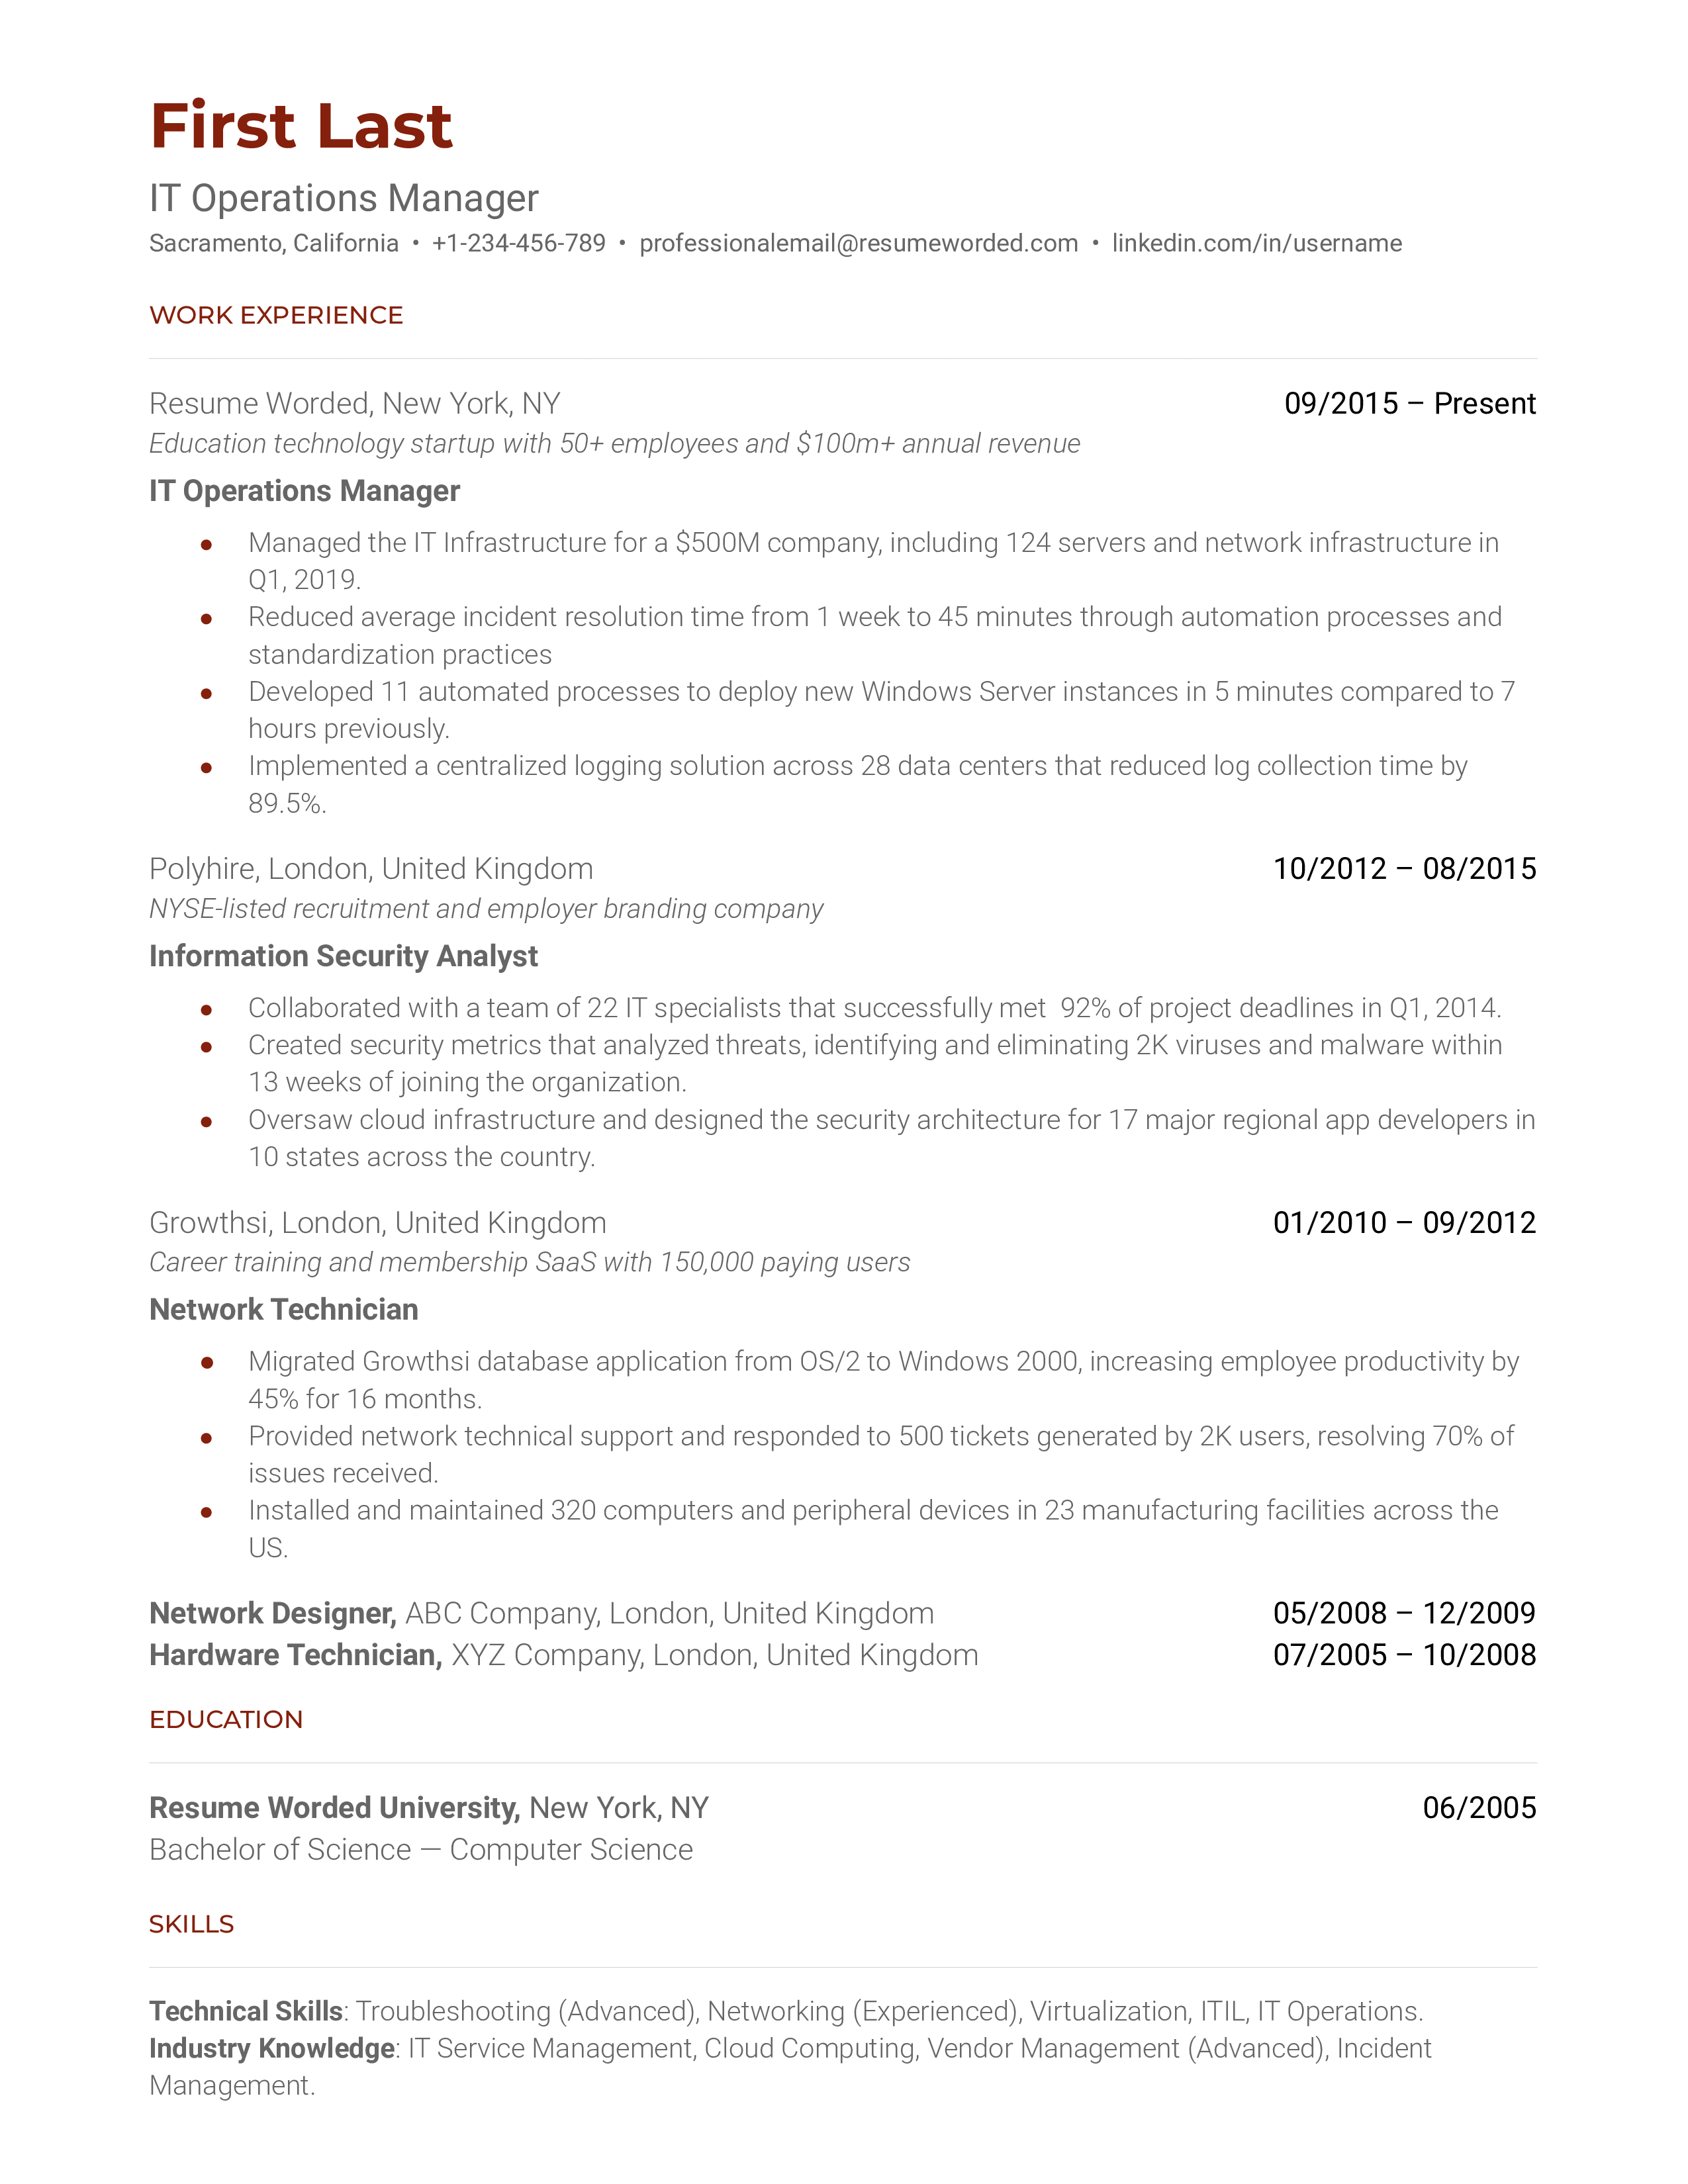 IT Operations Manager Resume Sample